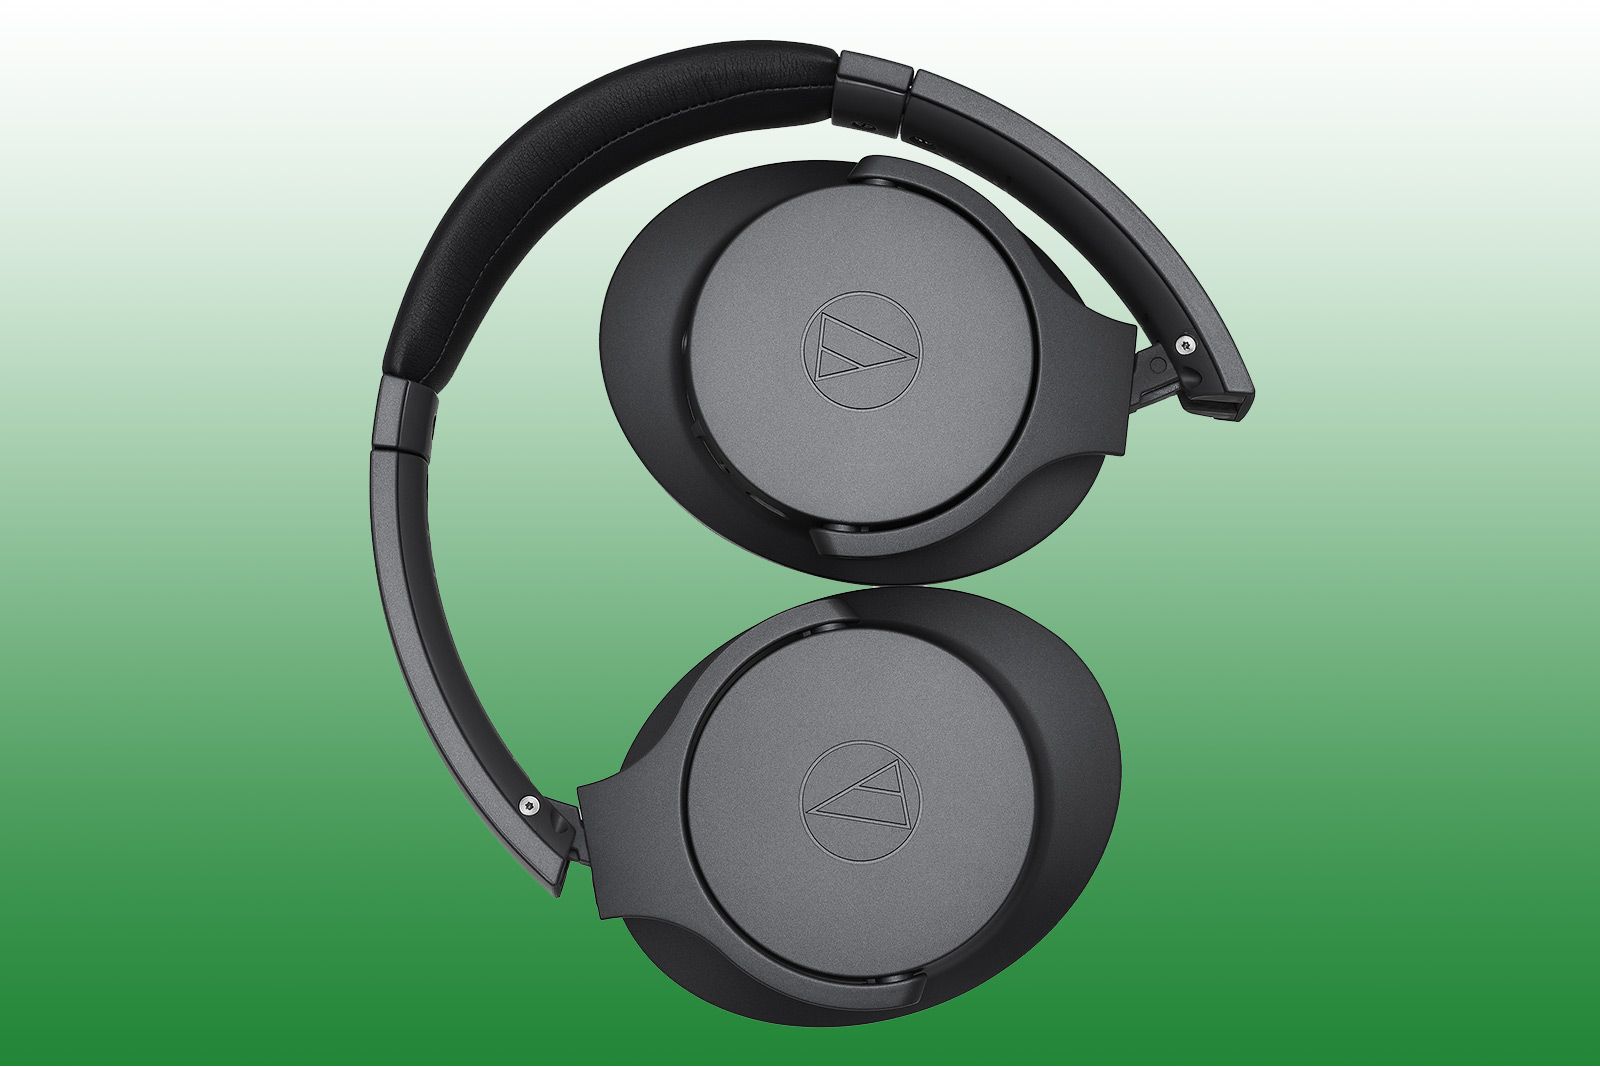 Audio-Technica launches ANC700BT wireless over-ear headphones with noise-cancellation and 30 hour battery life image 1